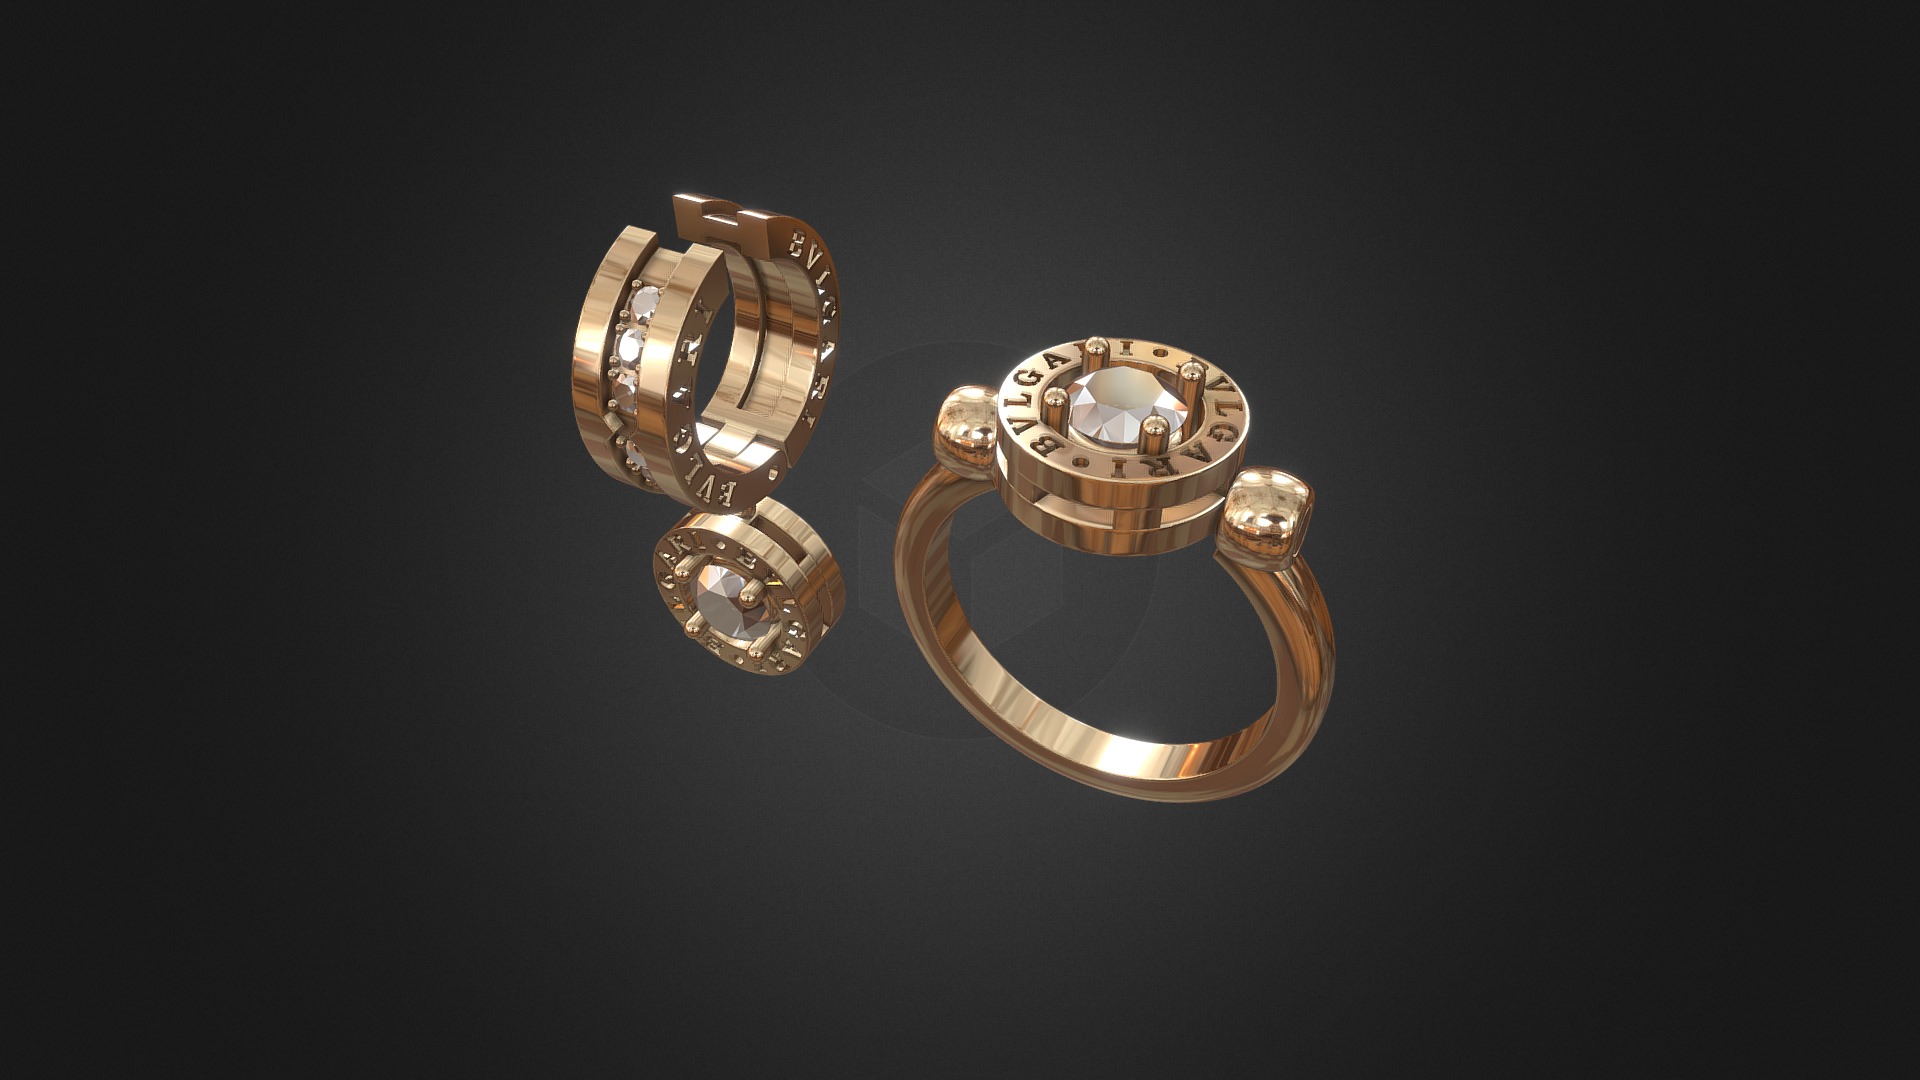 3D model 915 – Rings + Earrings - This is a 3D model of the 915 - Rings + Earrings. The 3D model is about a pair of gold rings with Gold Museum, Bogotá in the background.